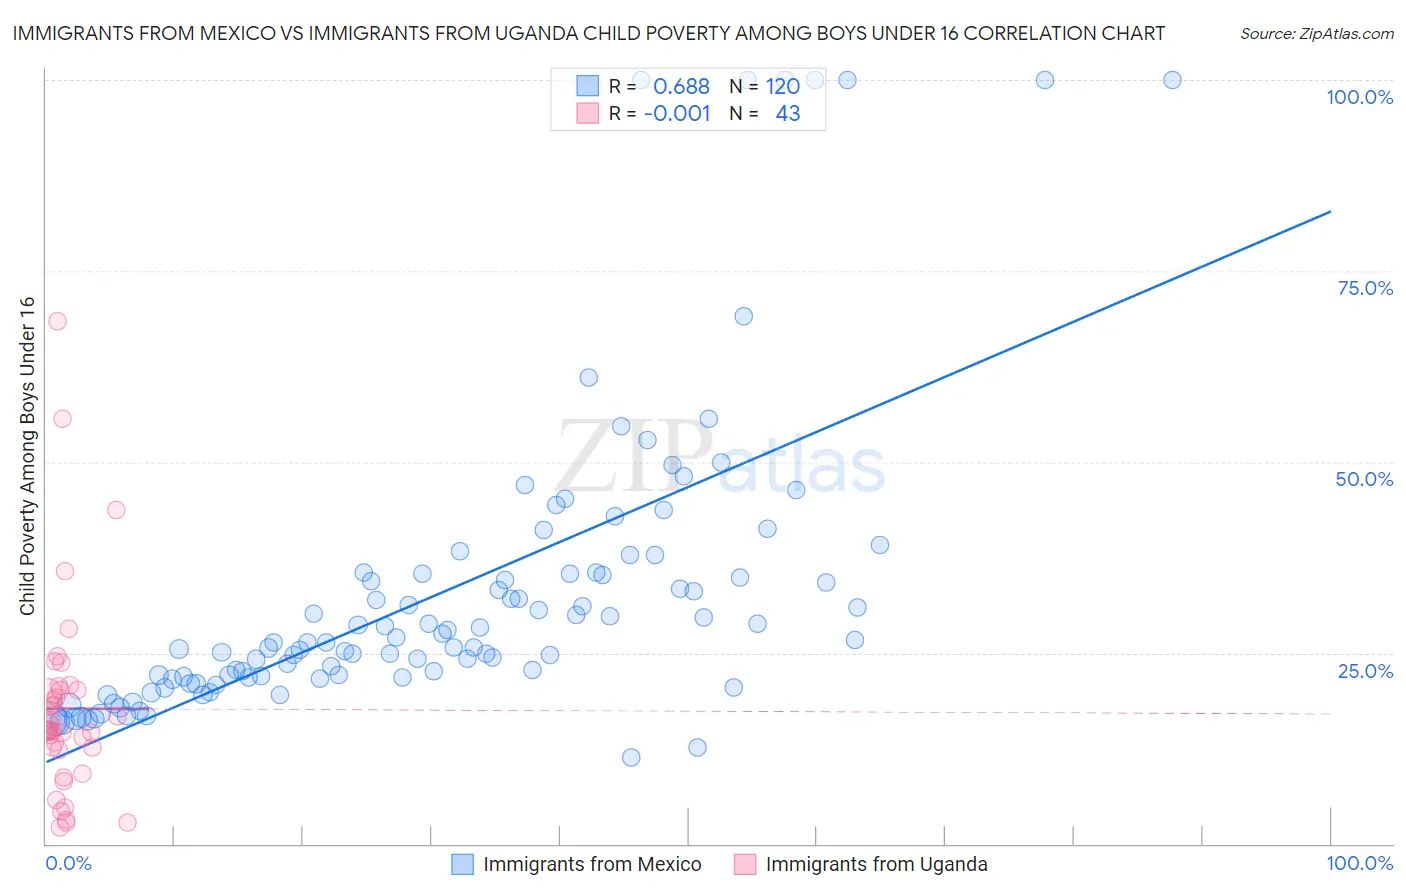 Immigrants from Mexico vs Immigrants from Uganda Child Poverty Among Boys Under 16